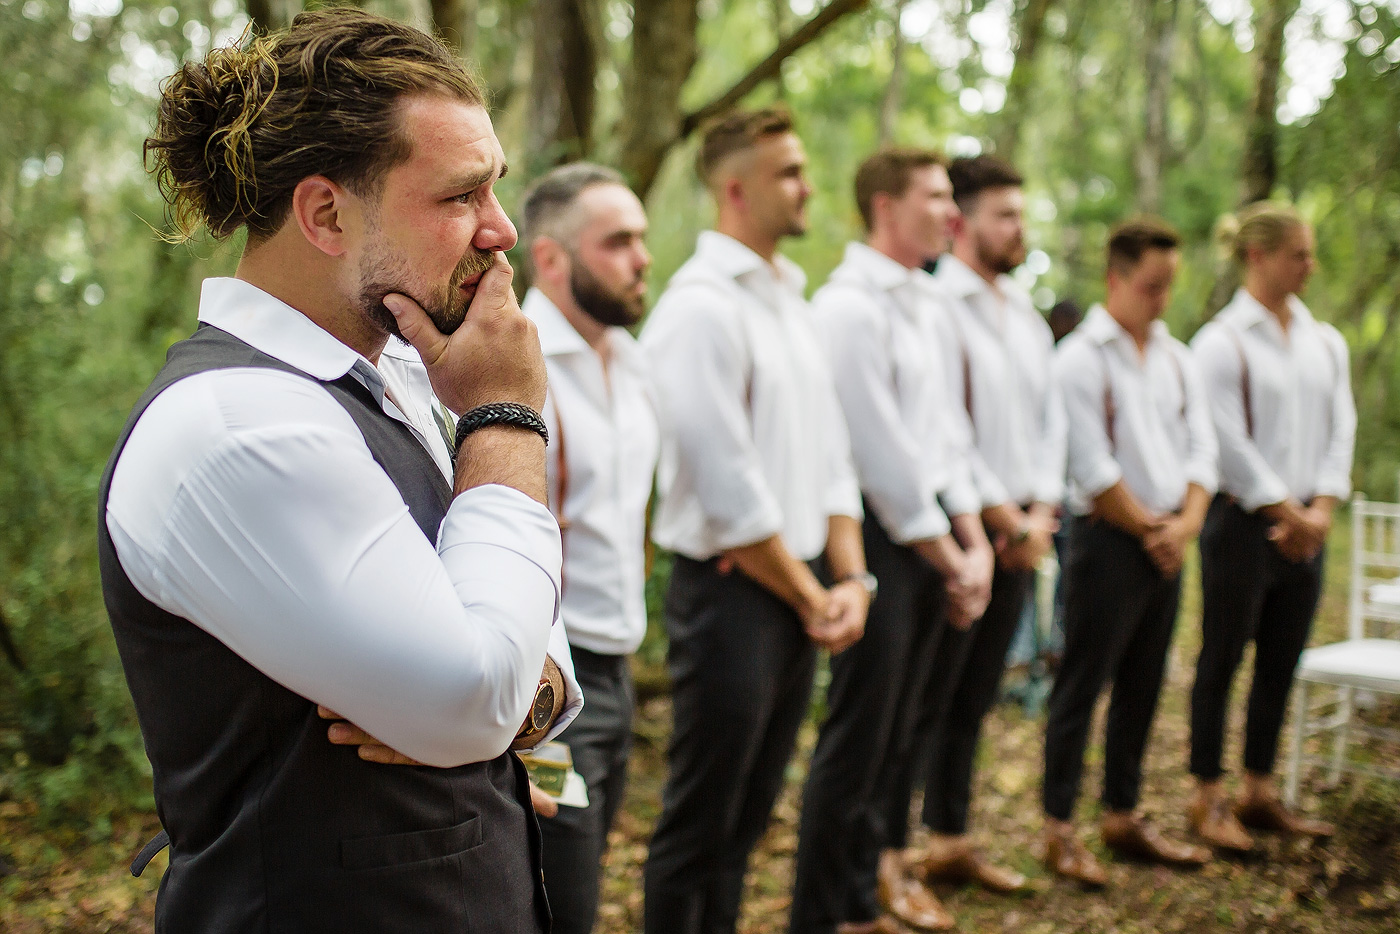 An emotional groom before the wedding ceremony in a forest